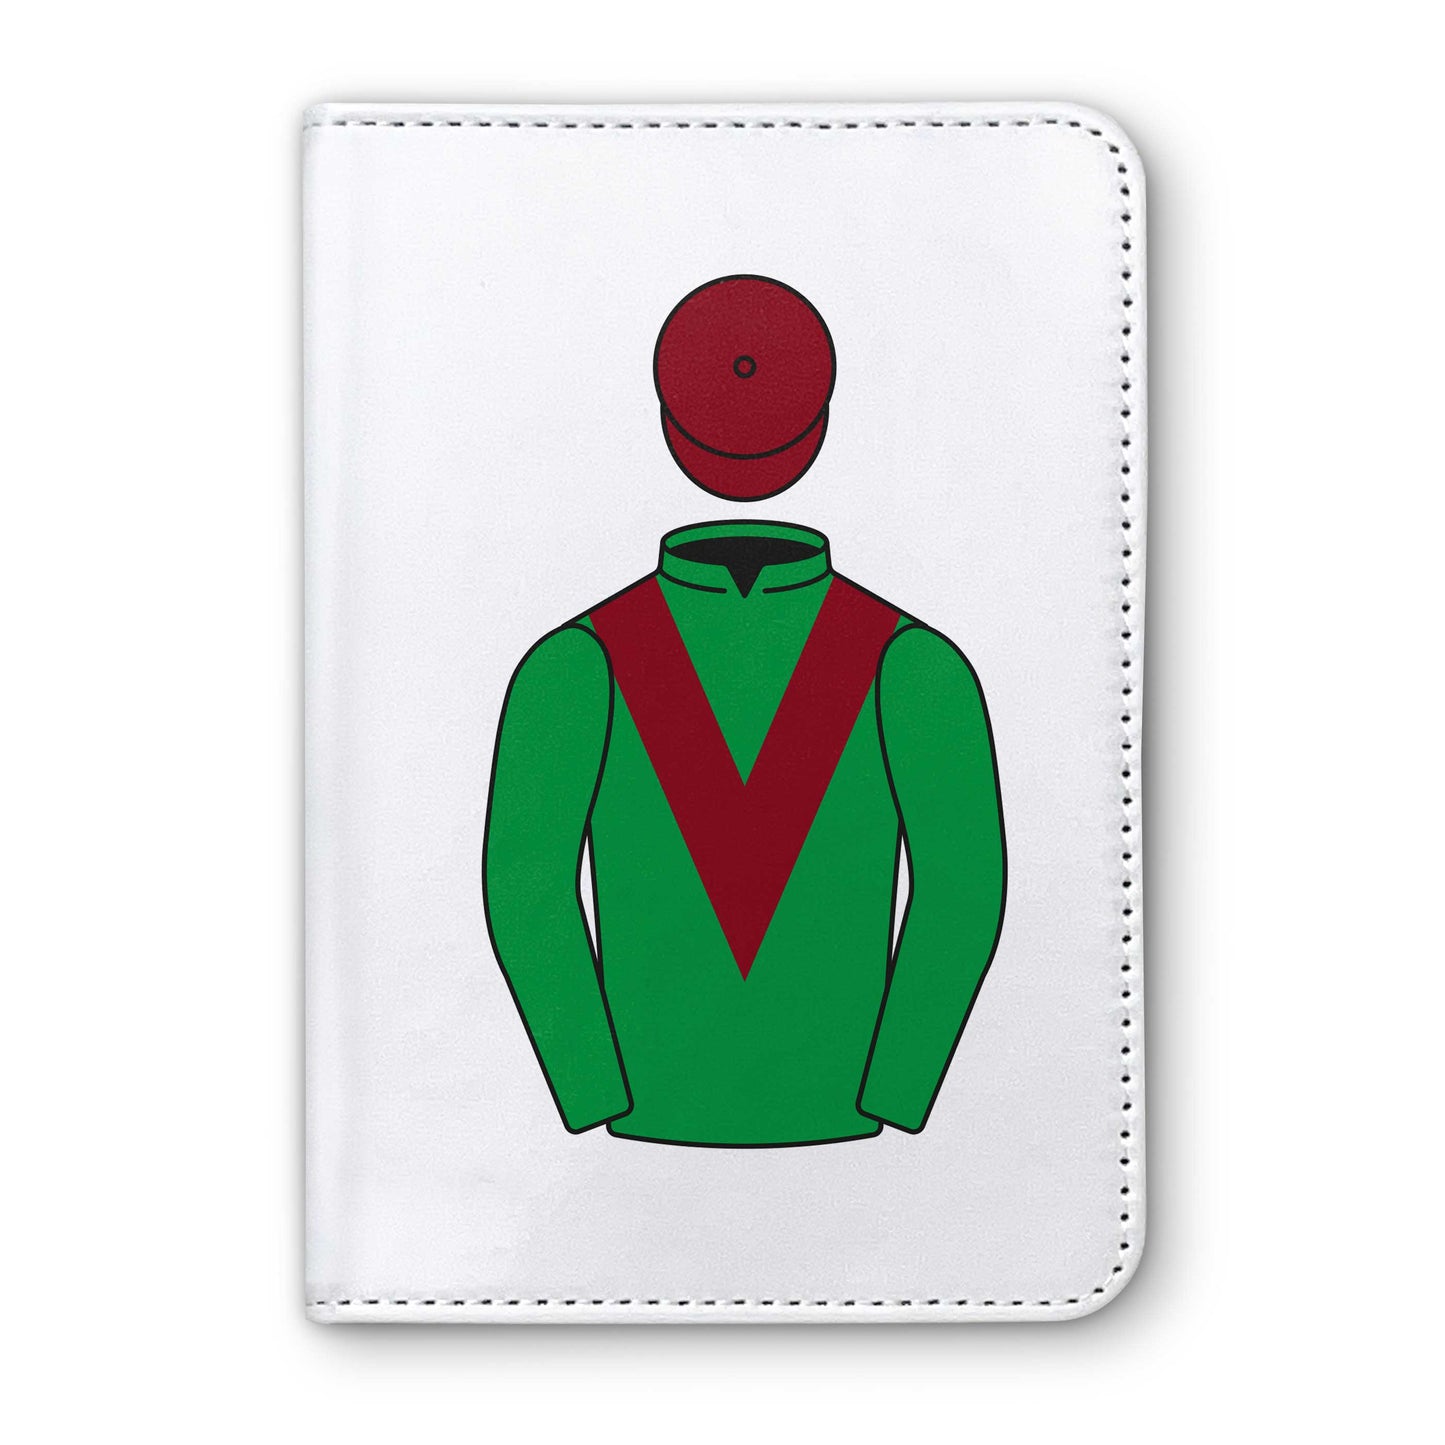 Team Valor and Gary Barber Horse Racing Passport Holder - Hacked Up Horse Racing Gifts